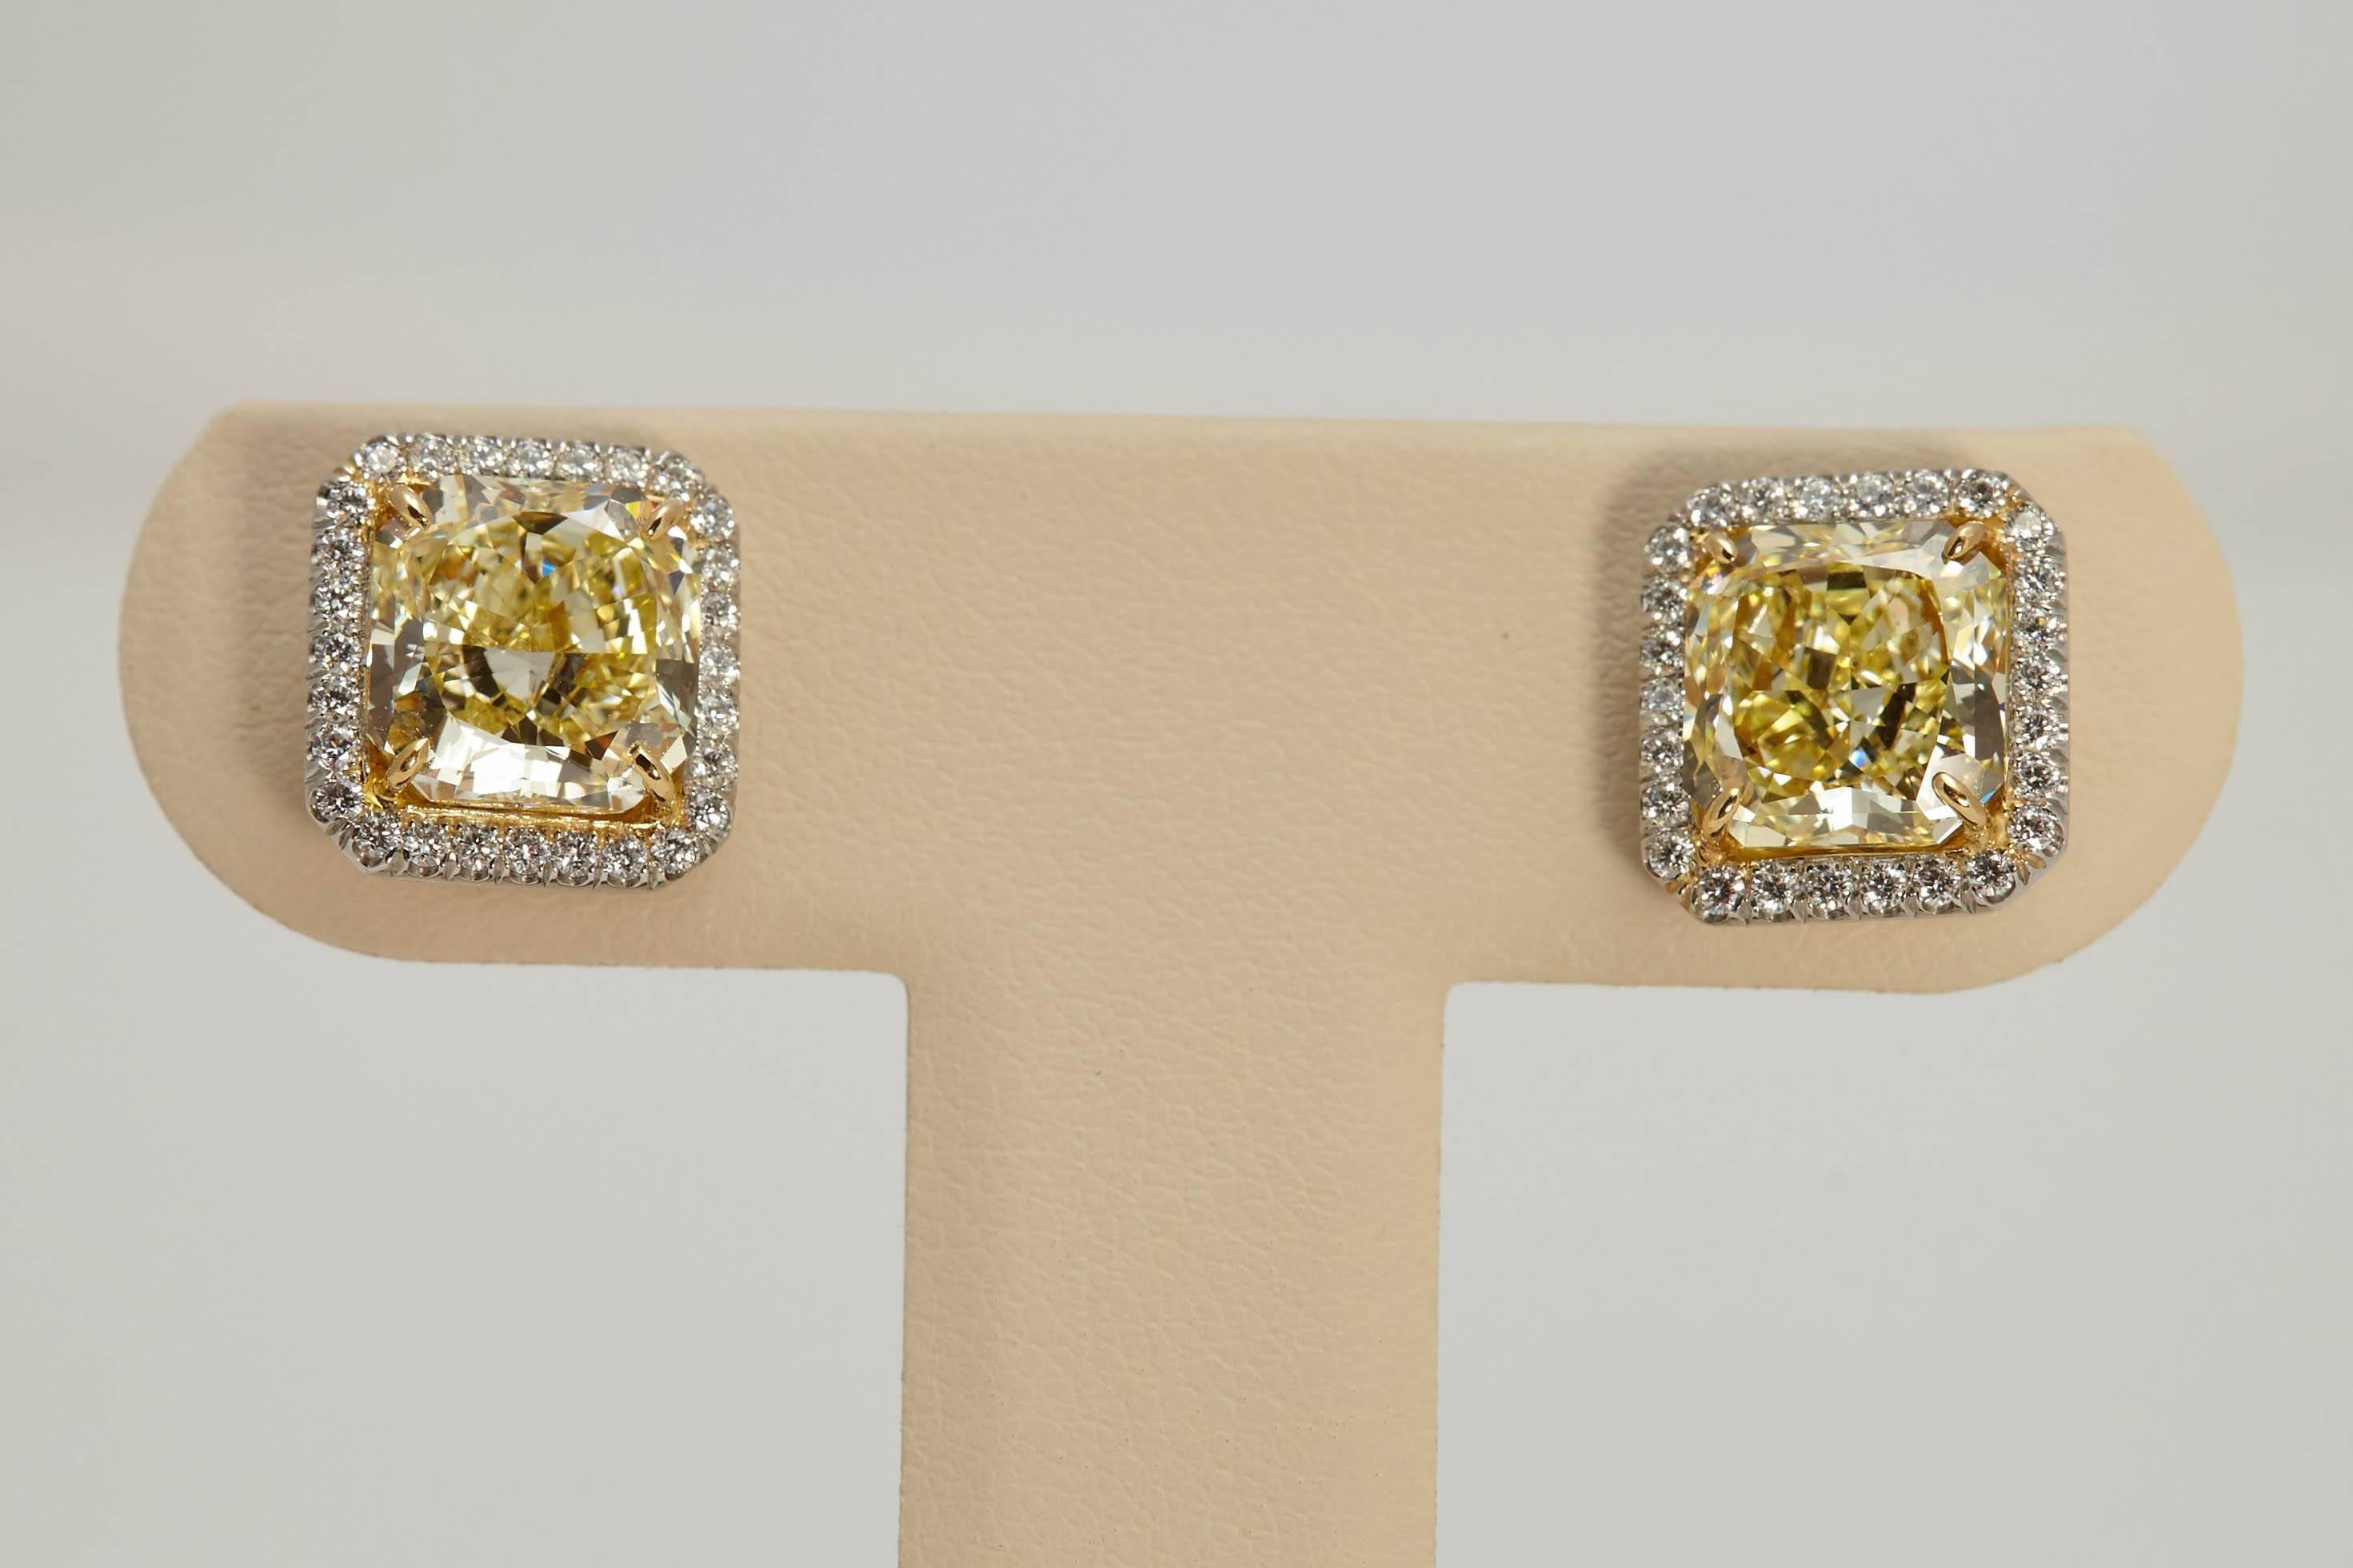 Pair of Fancy Yellow Radiant cut diamond earrings with a total weight of 6.61 carats in a halo setting surrounded by approximately  .45 carats of white diamonds. Set in platinum and 18 karat yellow gold. The diamonds weigh 3.22 carats and 3.39